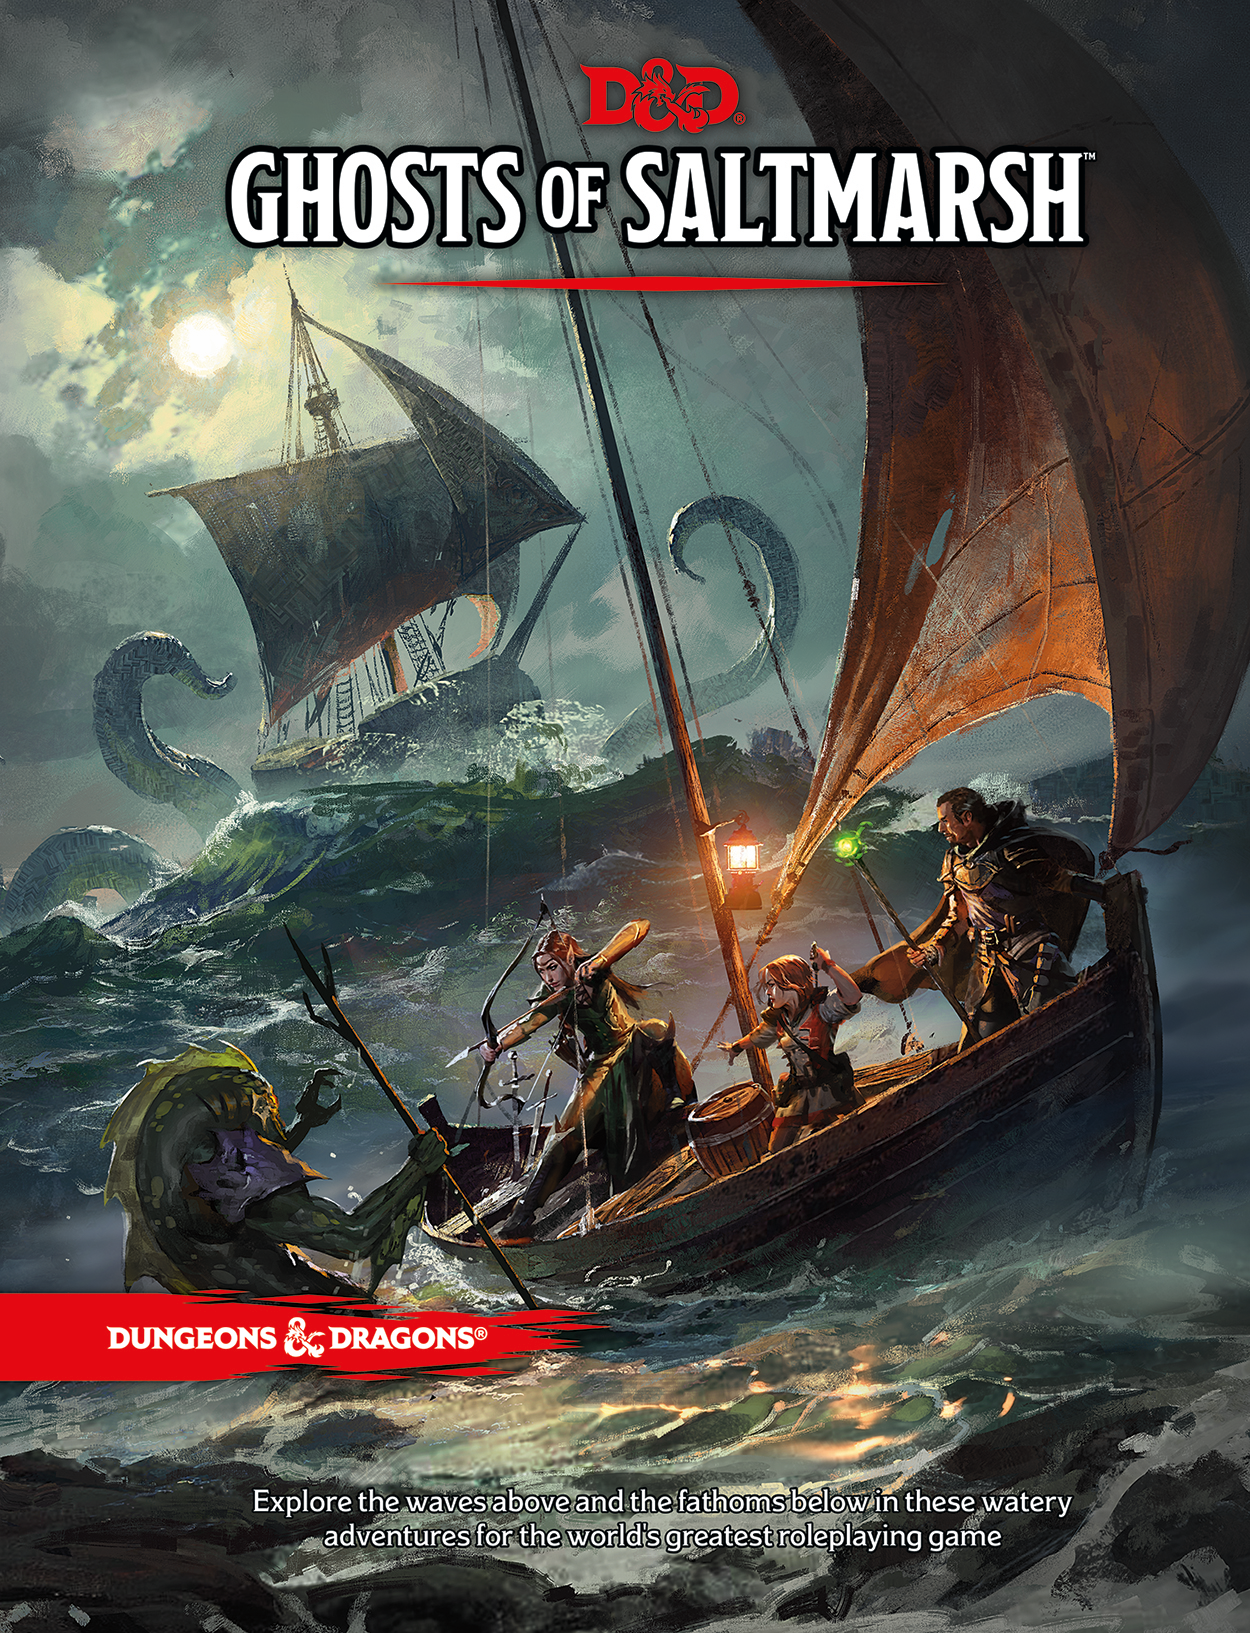 Ghost of saltmarch